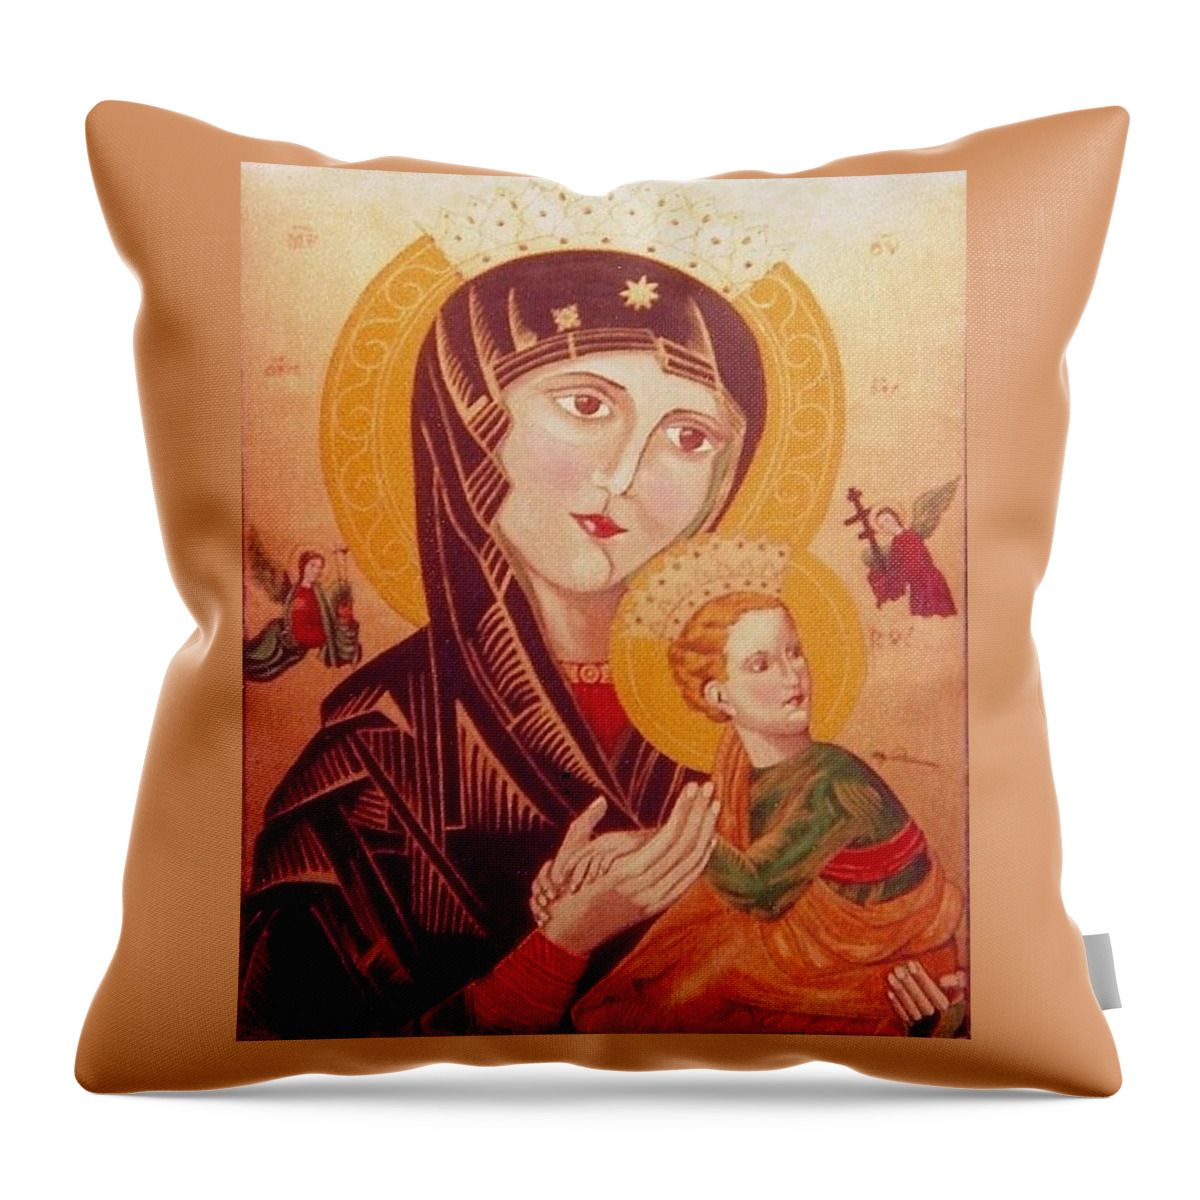 Icon Throw Pillow featuring the painting Icon by Elly Potamianos